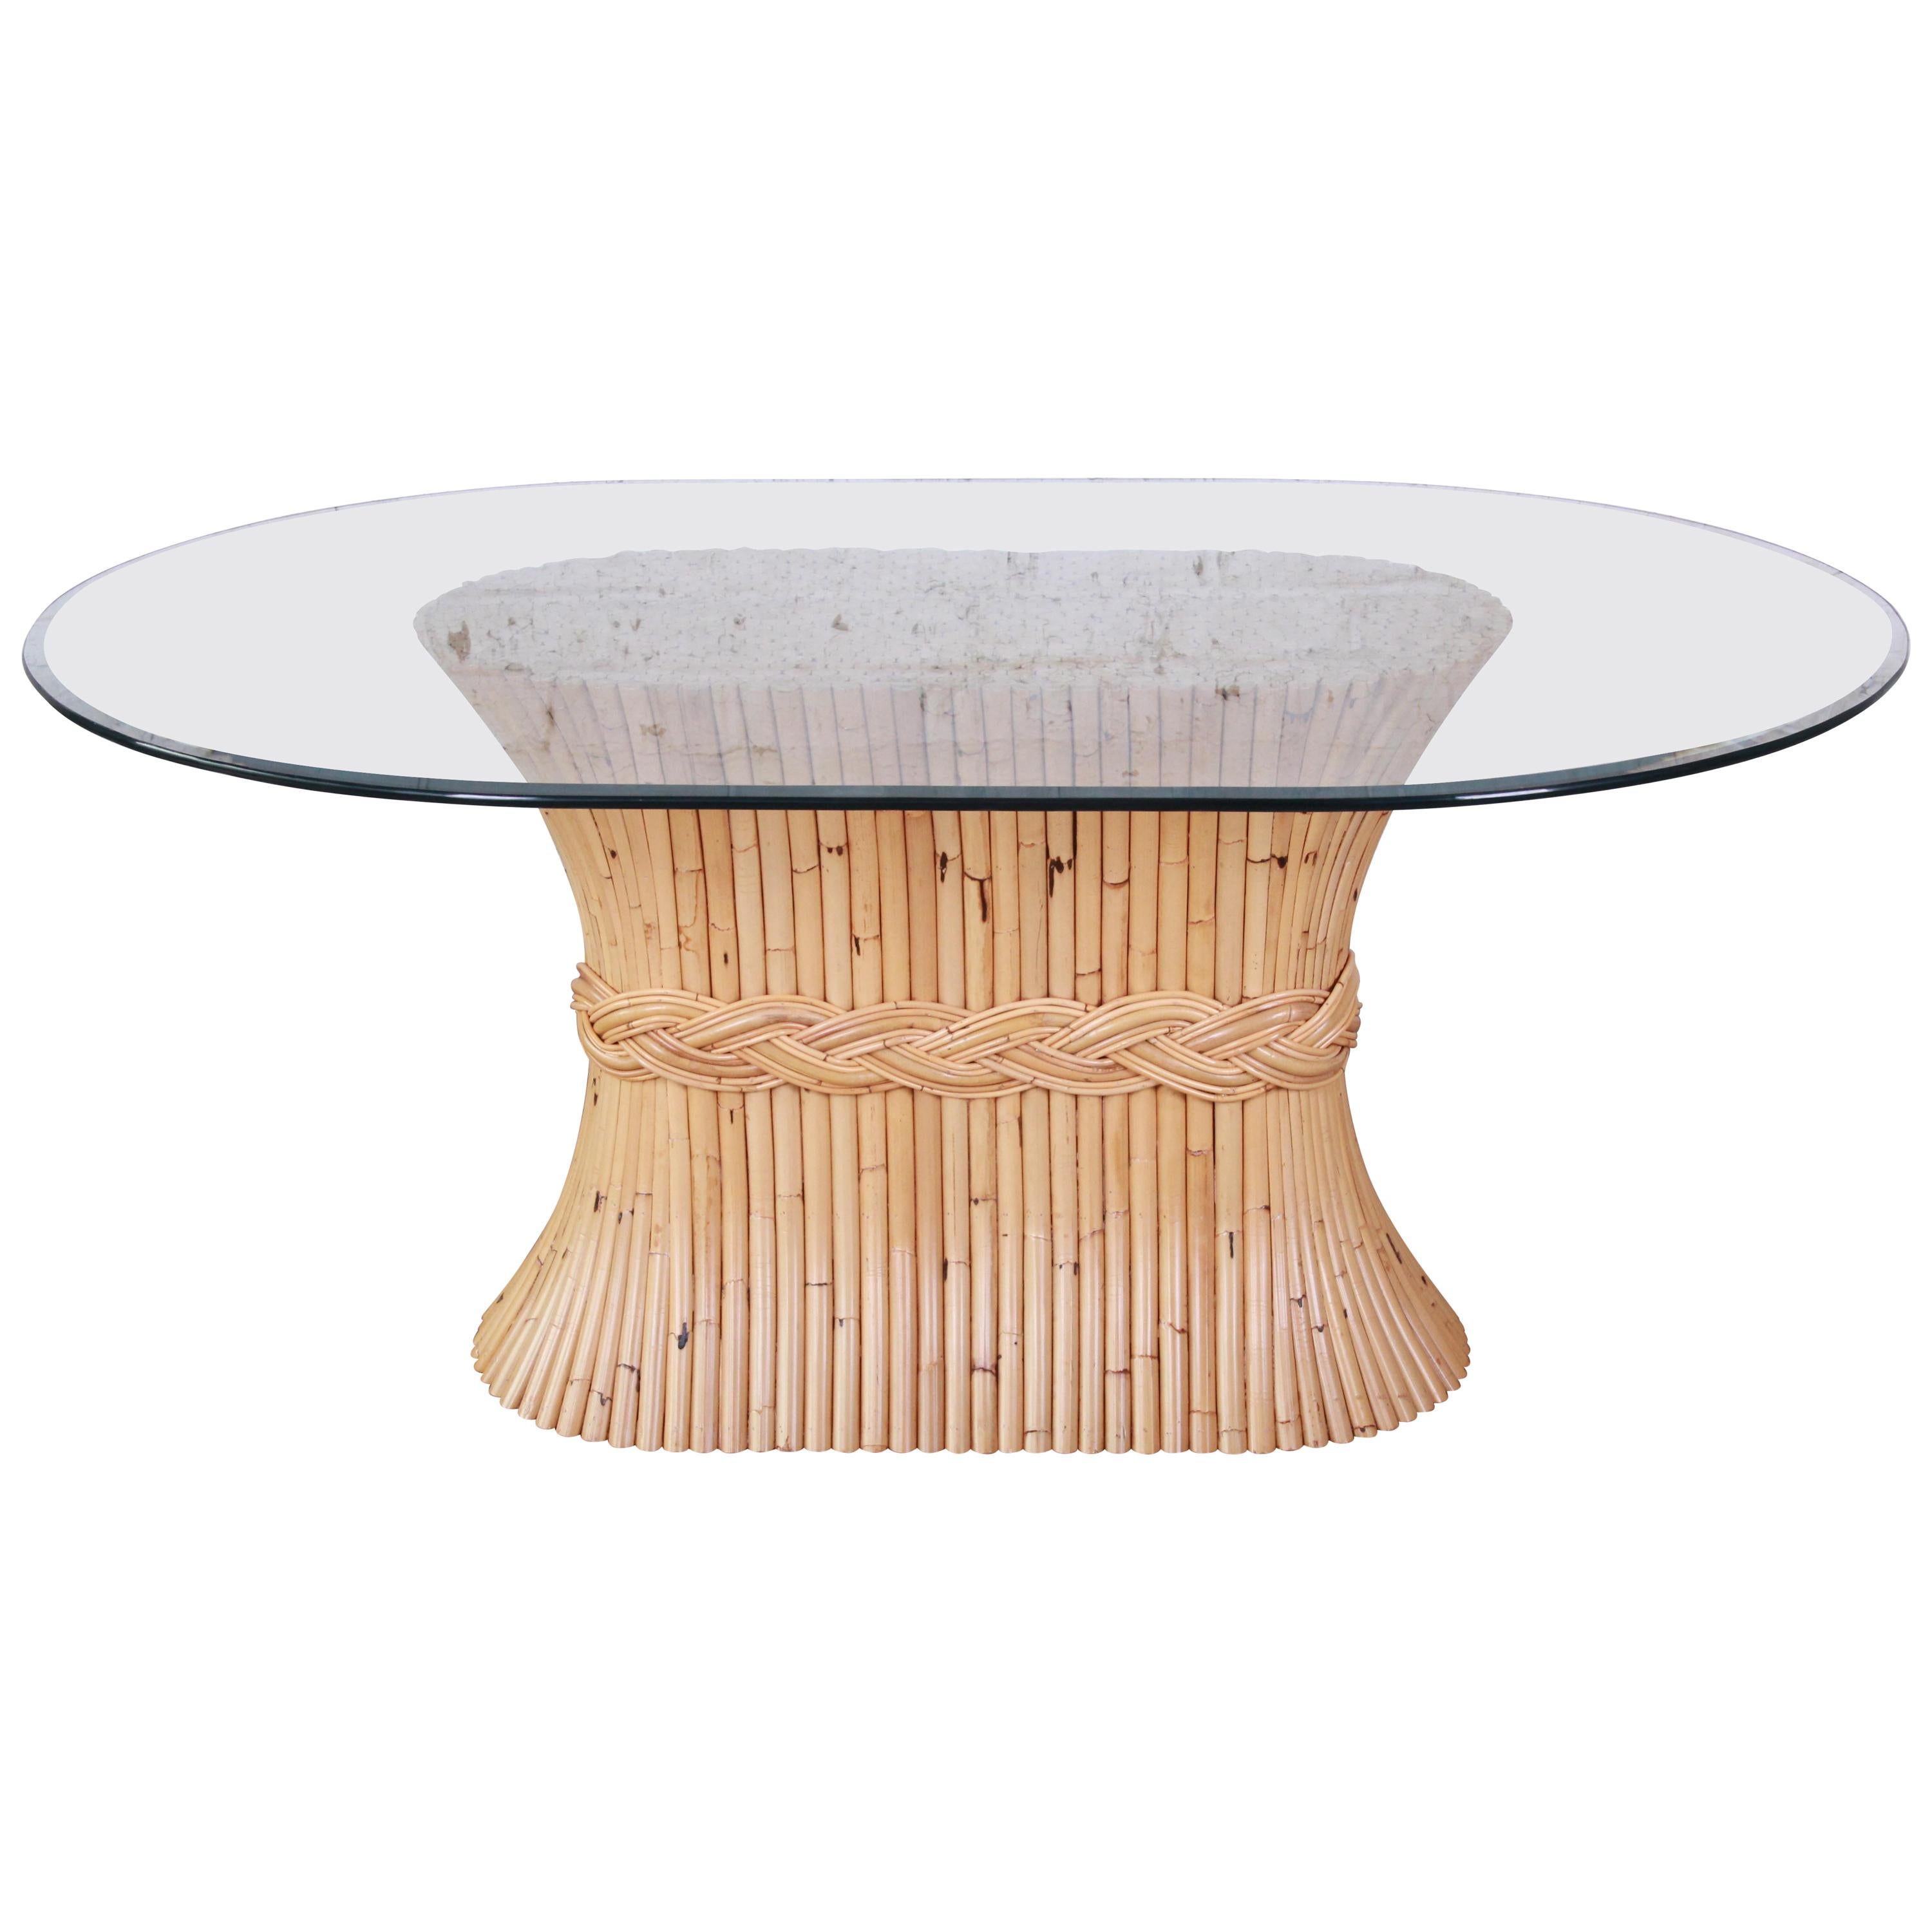 McGuire Midcentury Bamboo Pedestal Dining Table